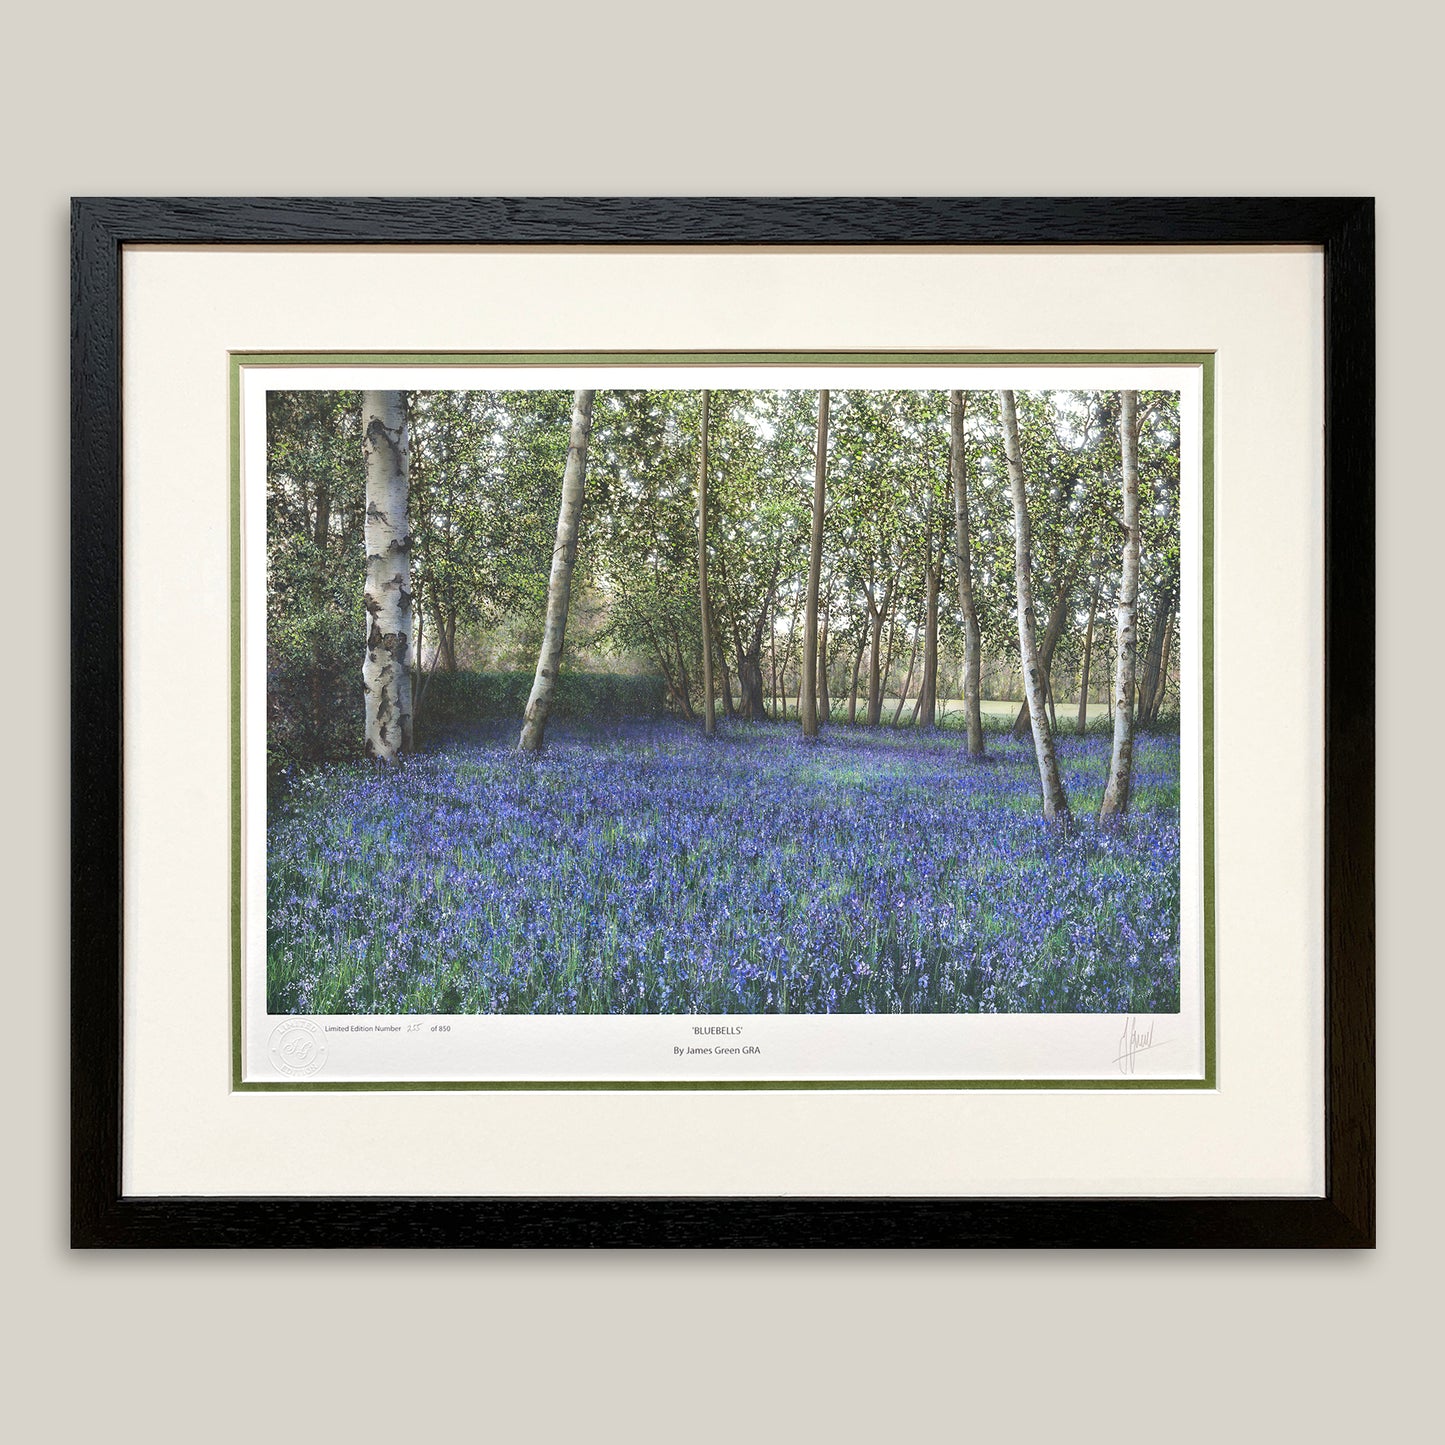 painting of the bluebell gardens at daft as a brush headquarters in a black frame